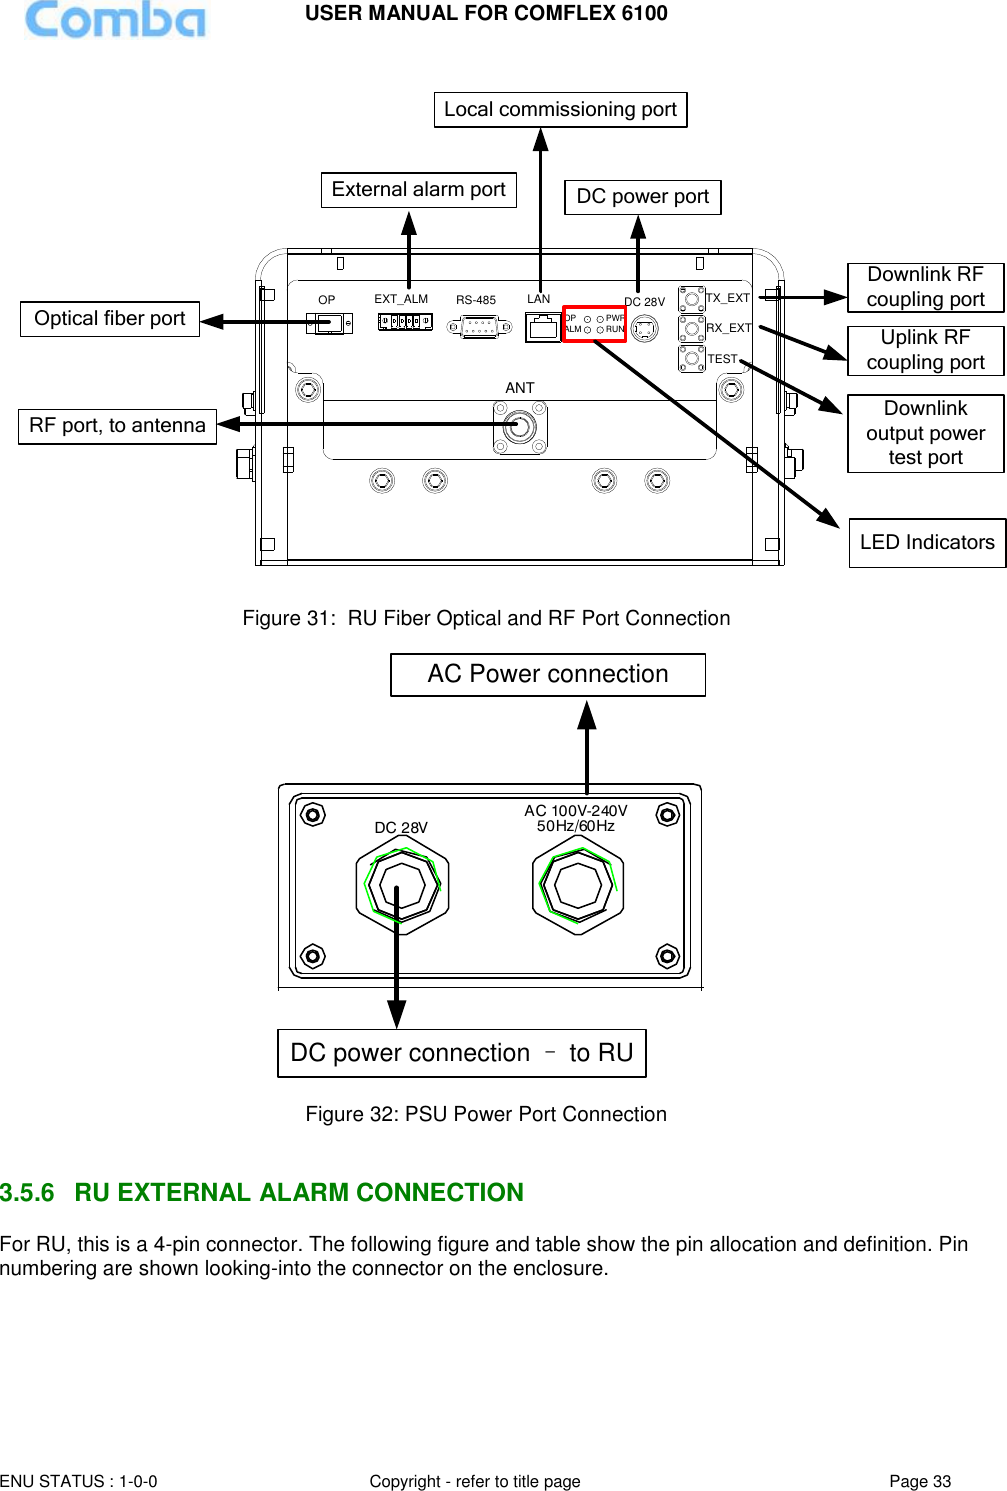 USER MANUAL FOR COMFLEX 6100  ENU STATUS : 1-0-0 Copyright - refer to title page Page 33     ANTPWRRUNALMOPOP EXT_ALM RS-485 LAN DC 28V TX_EXTRX_EXTTESTOptical fiber portRF port, to antennaLocal commissioning portDC power portExternal alarm portDownlink RF coupling portUplink RF coupling portDownlink output power test portLED Indicators Figure 31:  RU Fiber Optical and RF Port Connection DC power connection – to RU DC 28VAC 100V-240V50Hz/60HzAC Power connection Figure 32: PSU Power Port Connection   3.5.6  RU EXTERNAL ALARM CONNECTION  For RU, this is a 4-pin connector. The following figure and table show the pin allocation and definition. Pin numbering are shown looking-into the connector on the enclosure.  